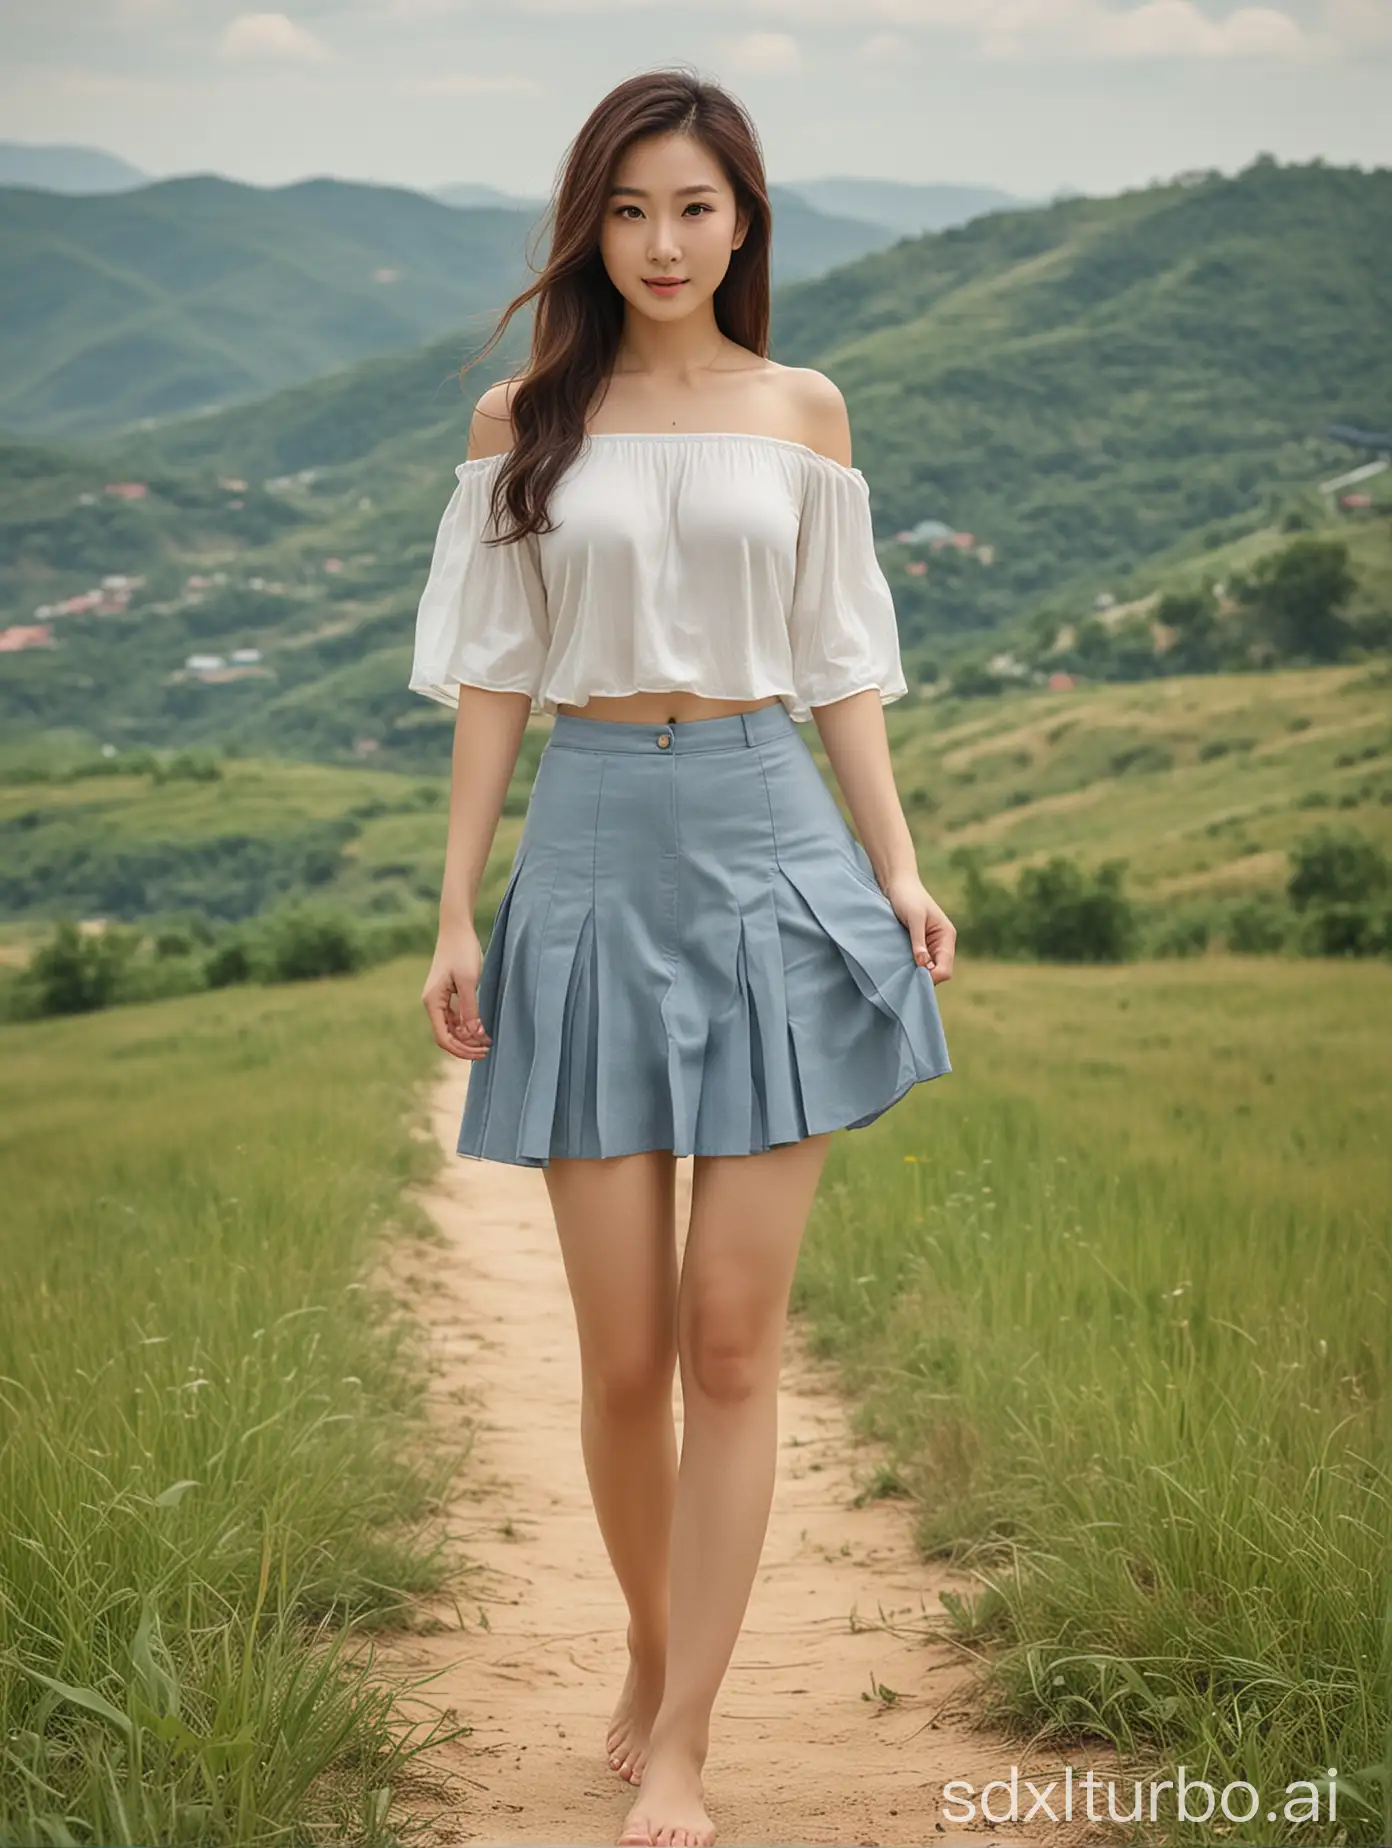 32 plano year old Chinese lady, 173 centimeters in height, 68 kilograms in weight, delicate and beautiful features, fair and smooth skin, tall and slender figure, well-defined curves, a hint of abs, perfect hourglass figure, ideal body proportions (golden ratio), light brown hair to shoulder length, loose waves, fitted white top and knee-length blue skirt, walking barefoot. Surroundings: rolling hills with grasslands and some trees, cloudy sky